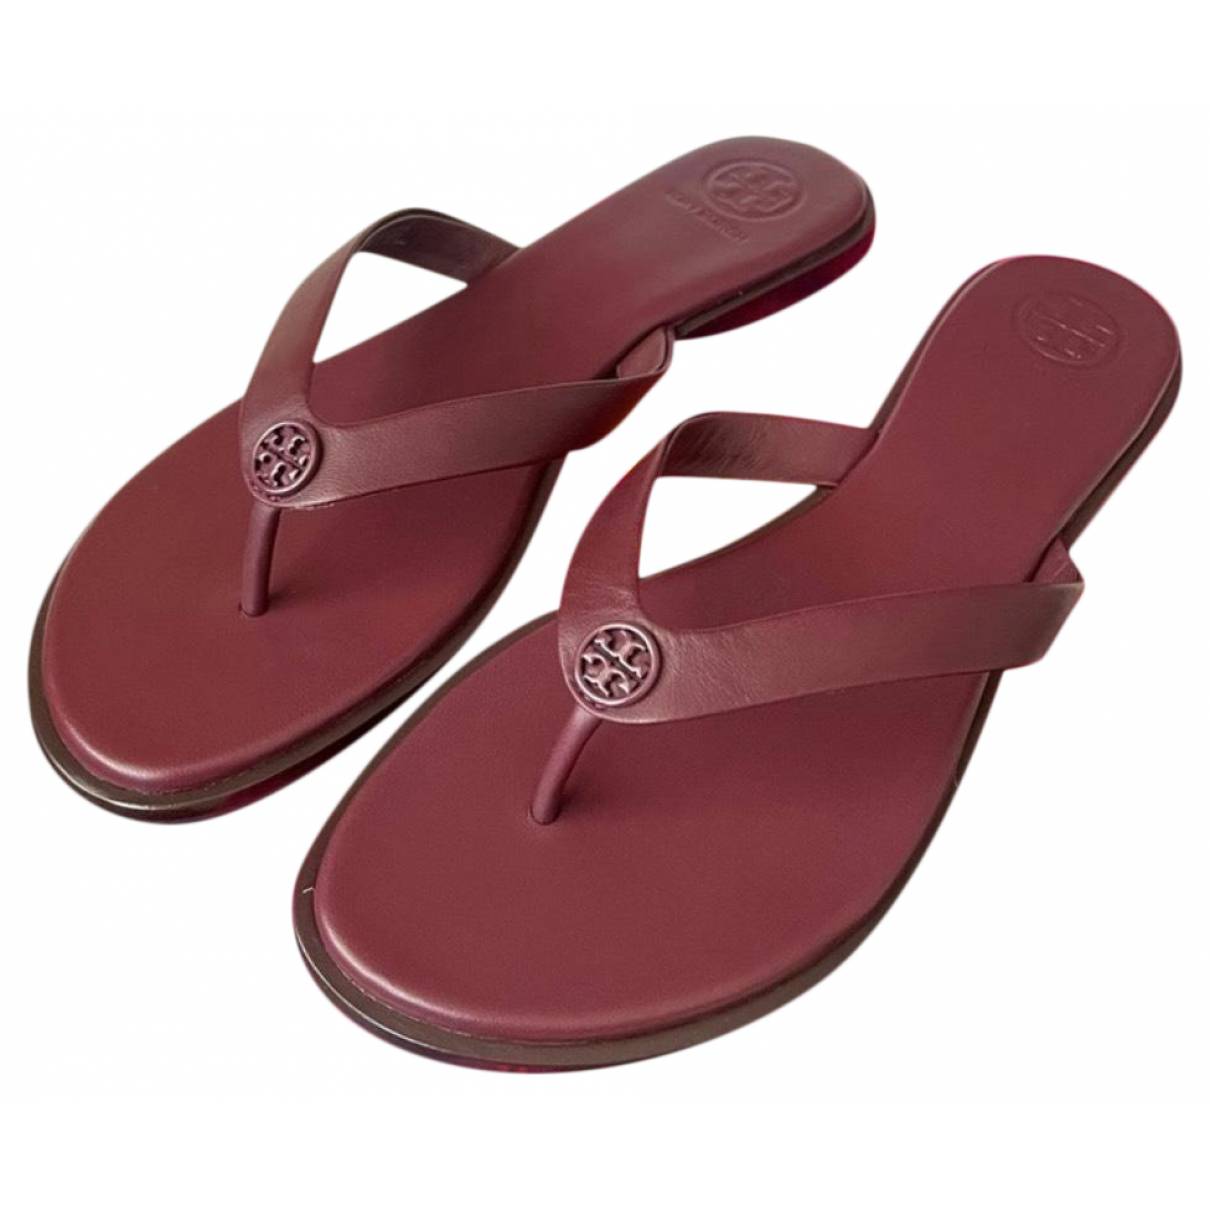 Leather sandals Tory Burch Burgundy size 8 US in Leather - 26619457